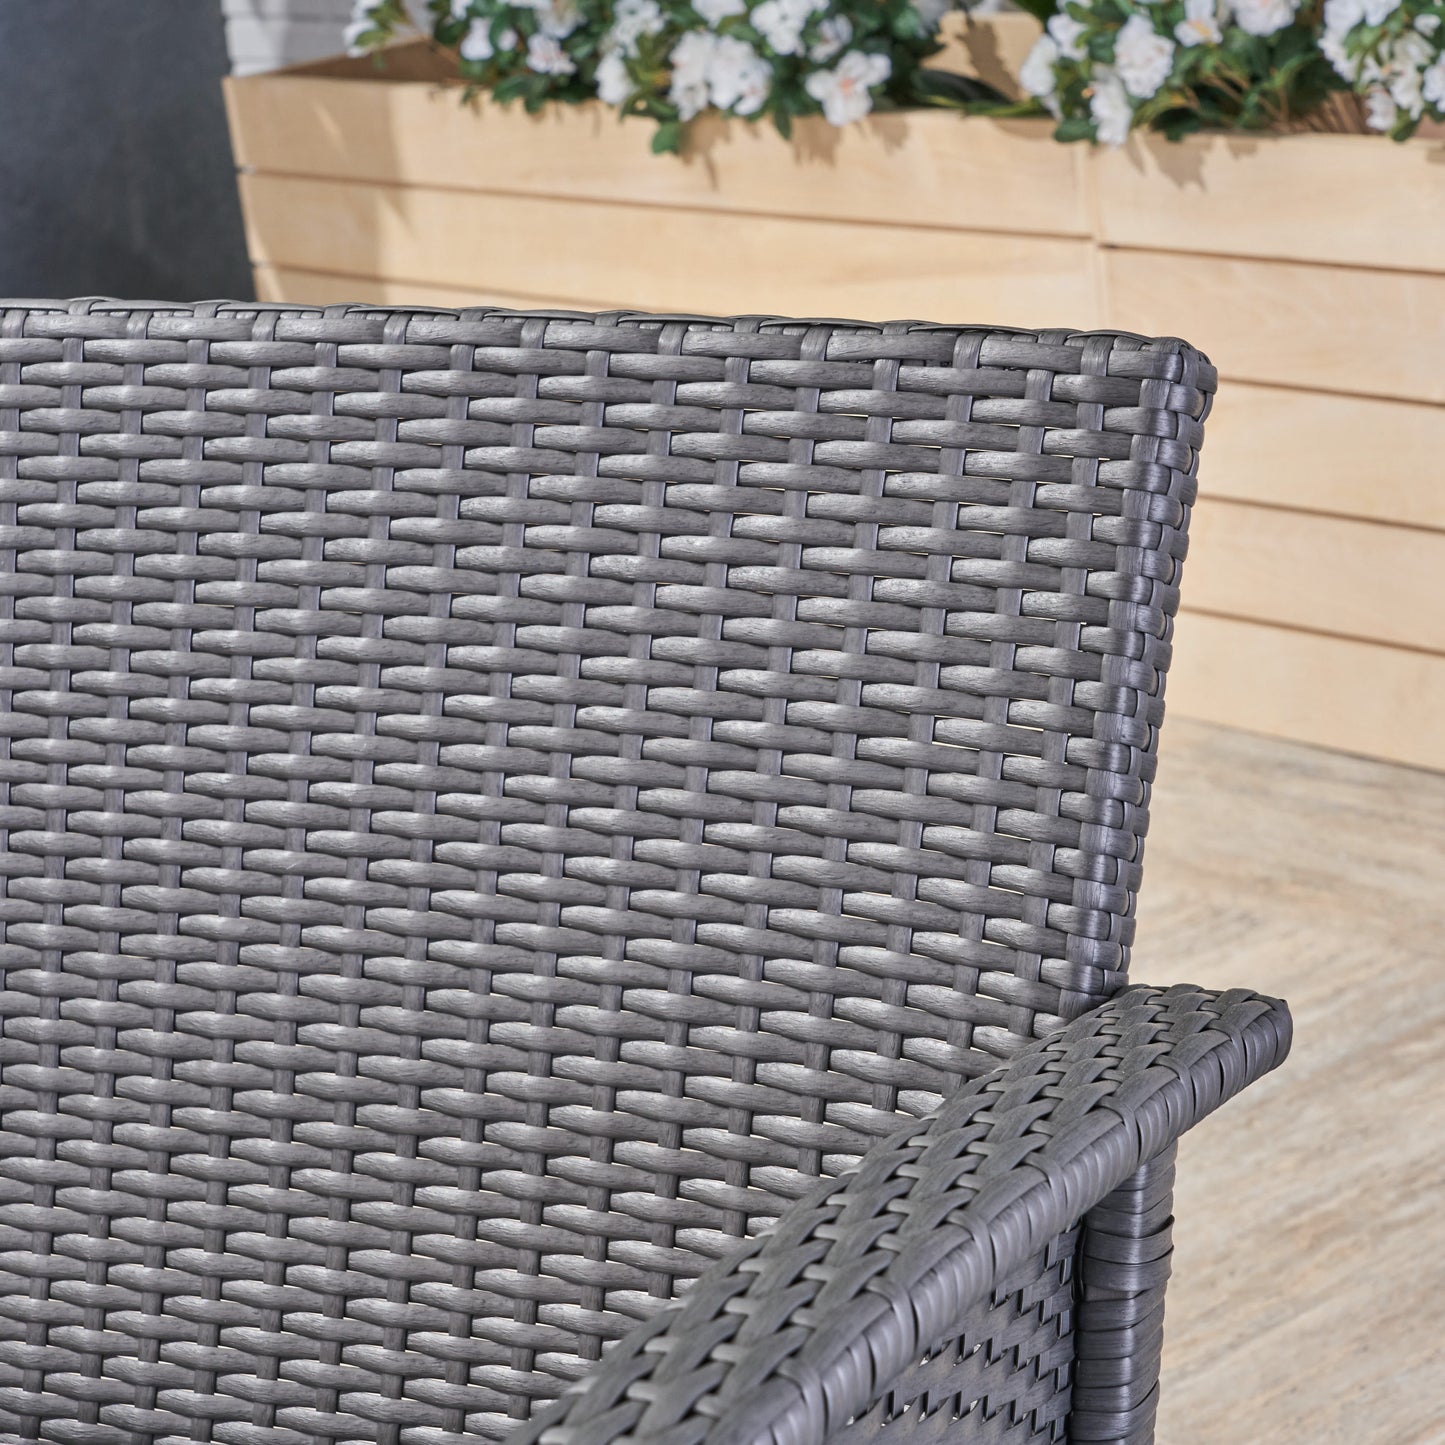 Roswell Outdoor 7 Seater Wicker Chat Set